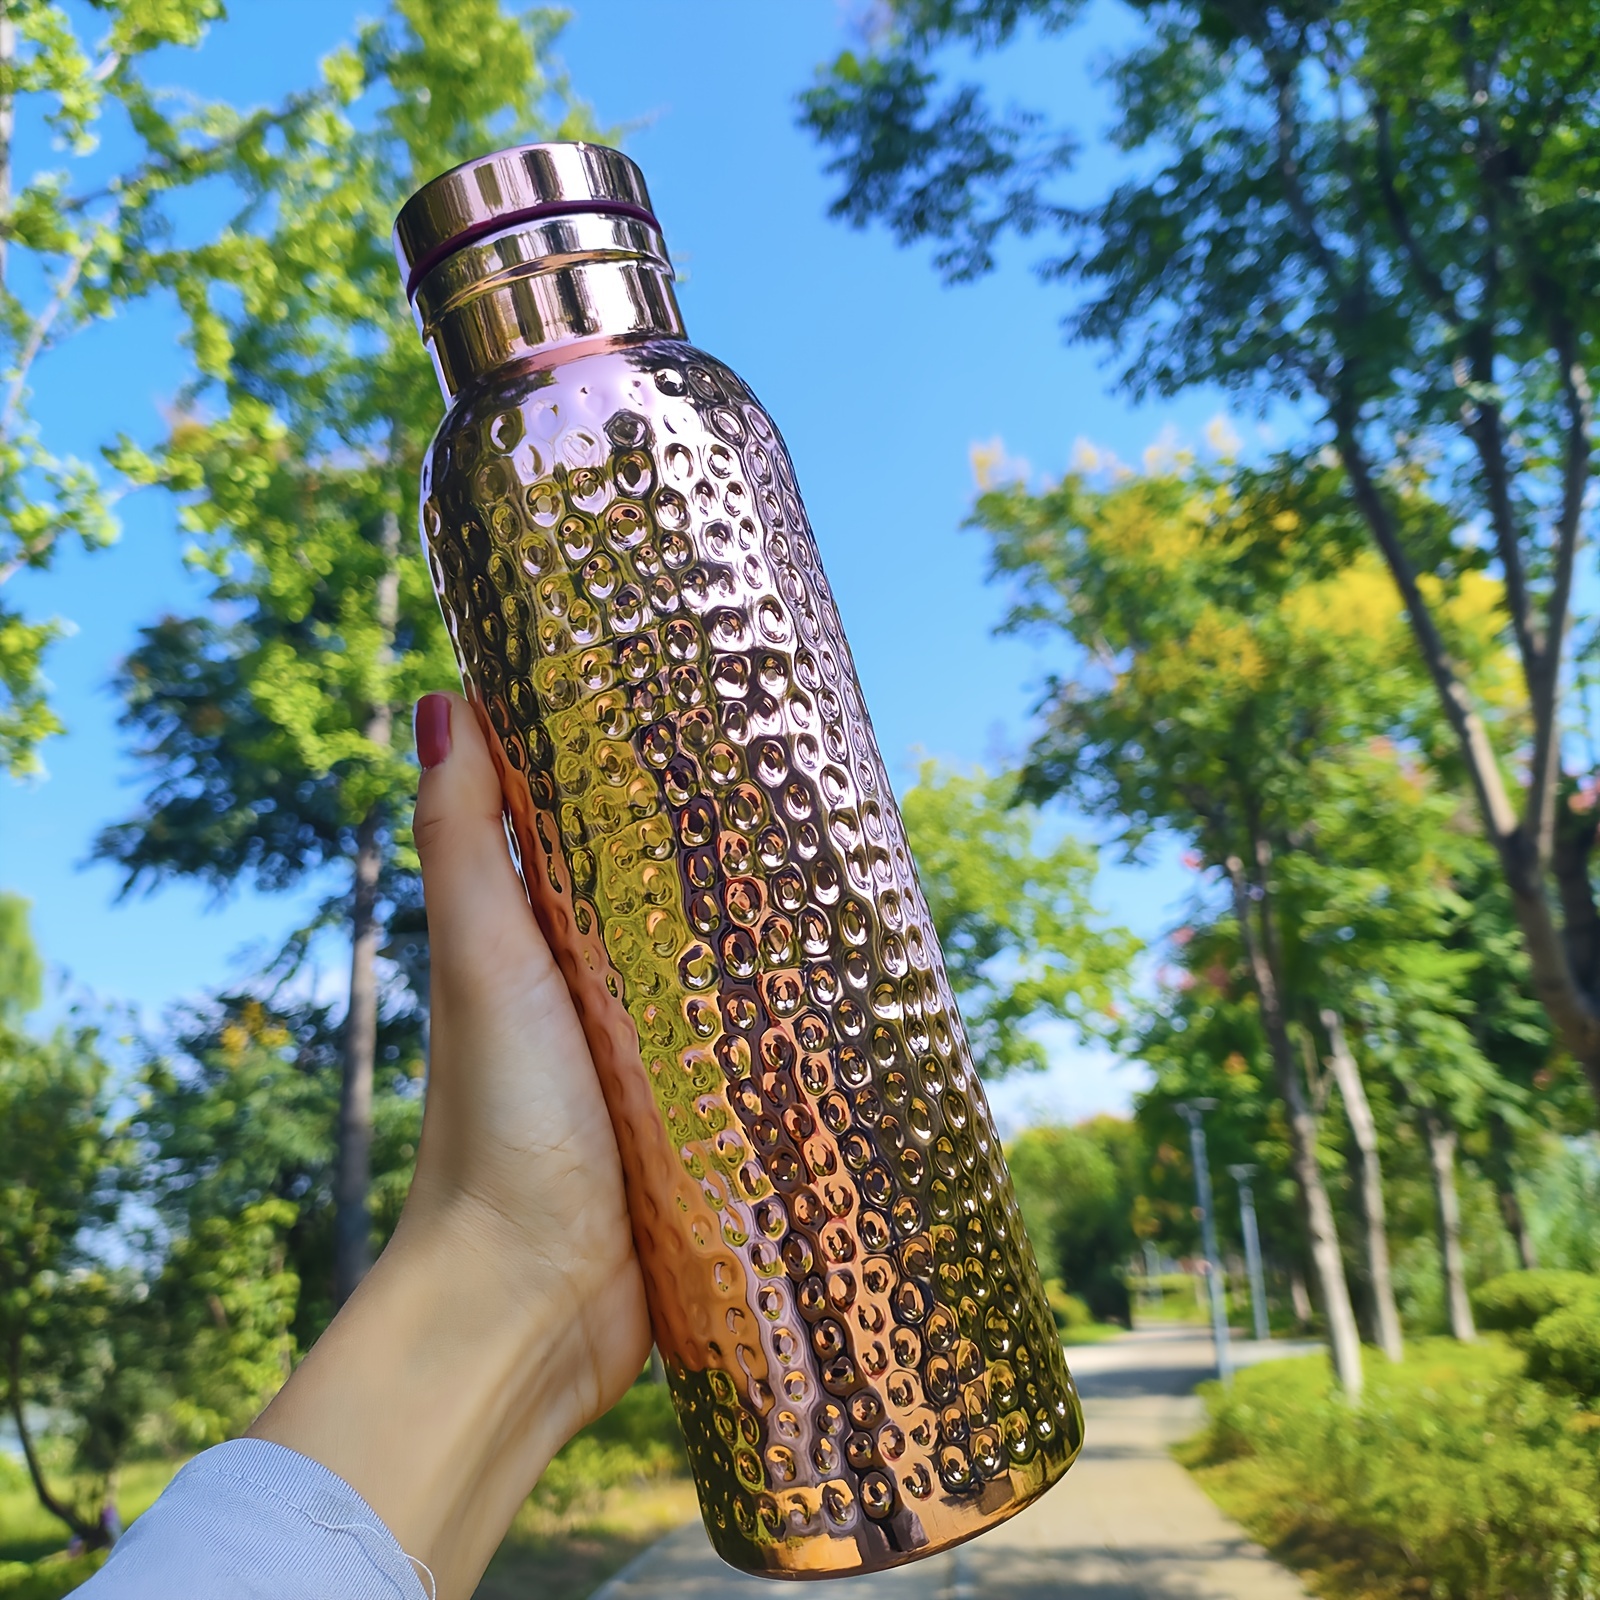 Stainless Steel Water Bottles Insulated